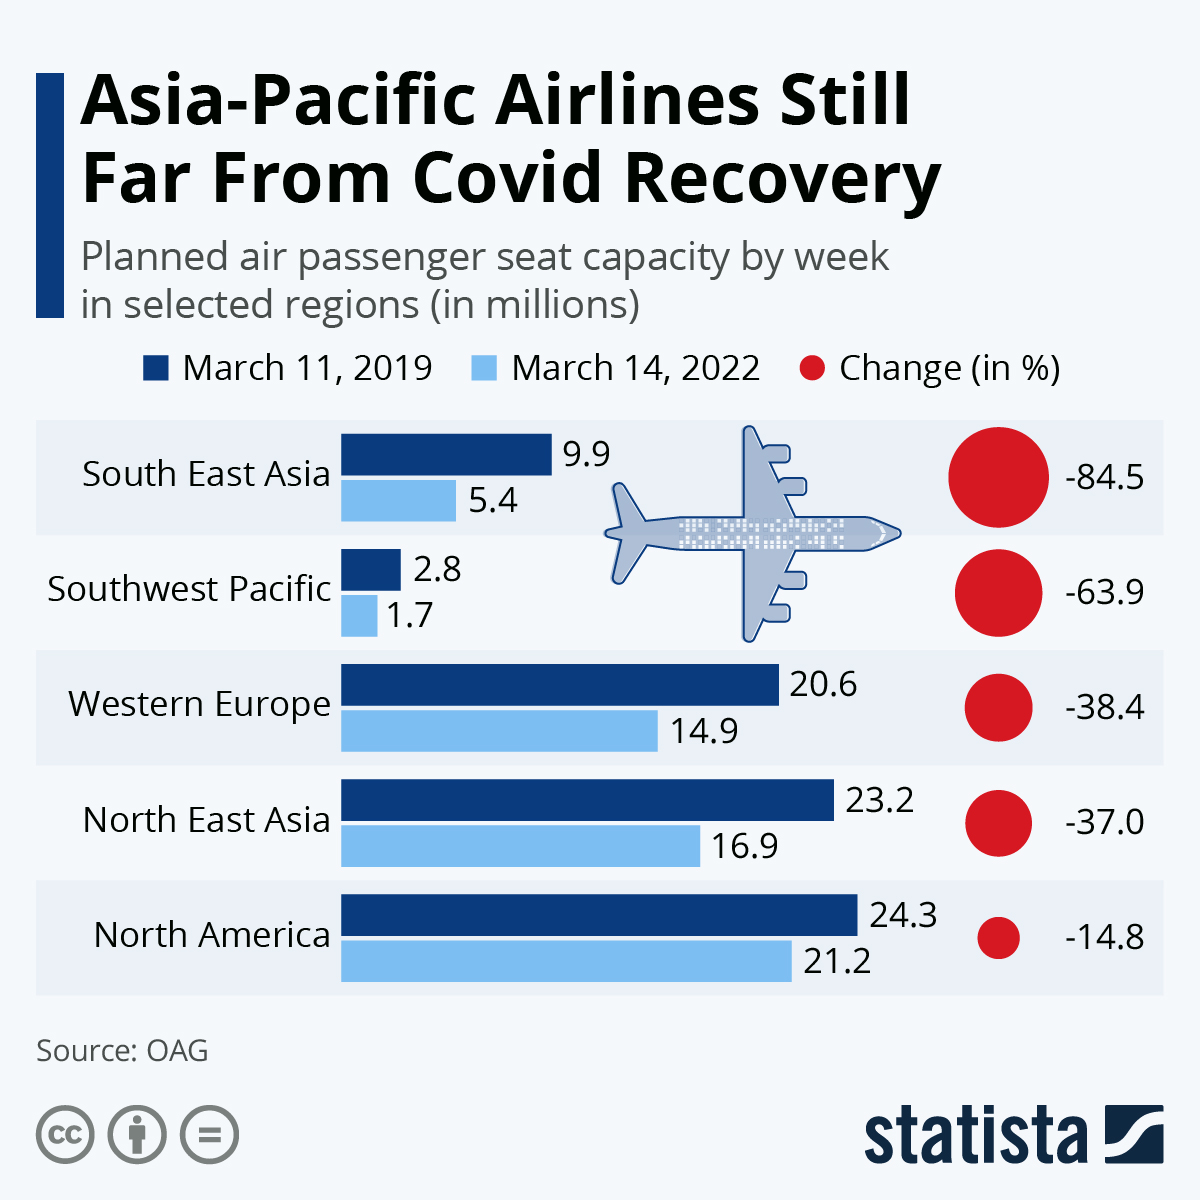 Asia-Pacific Airlines Still Far From Covid Recovery
